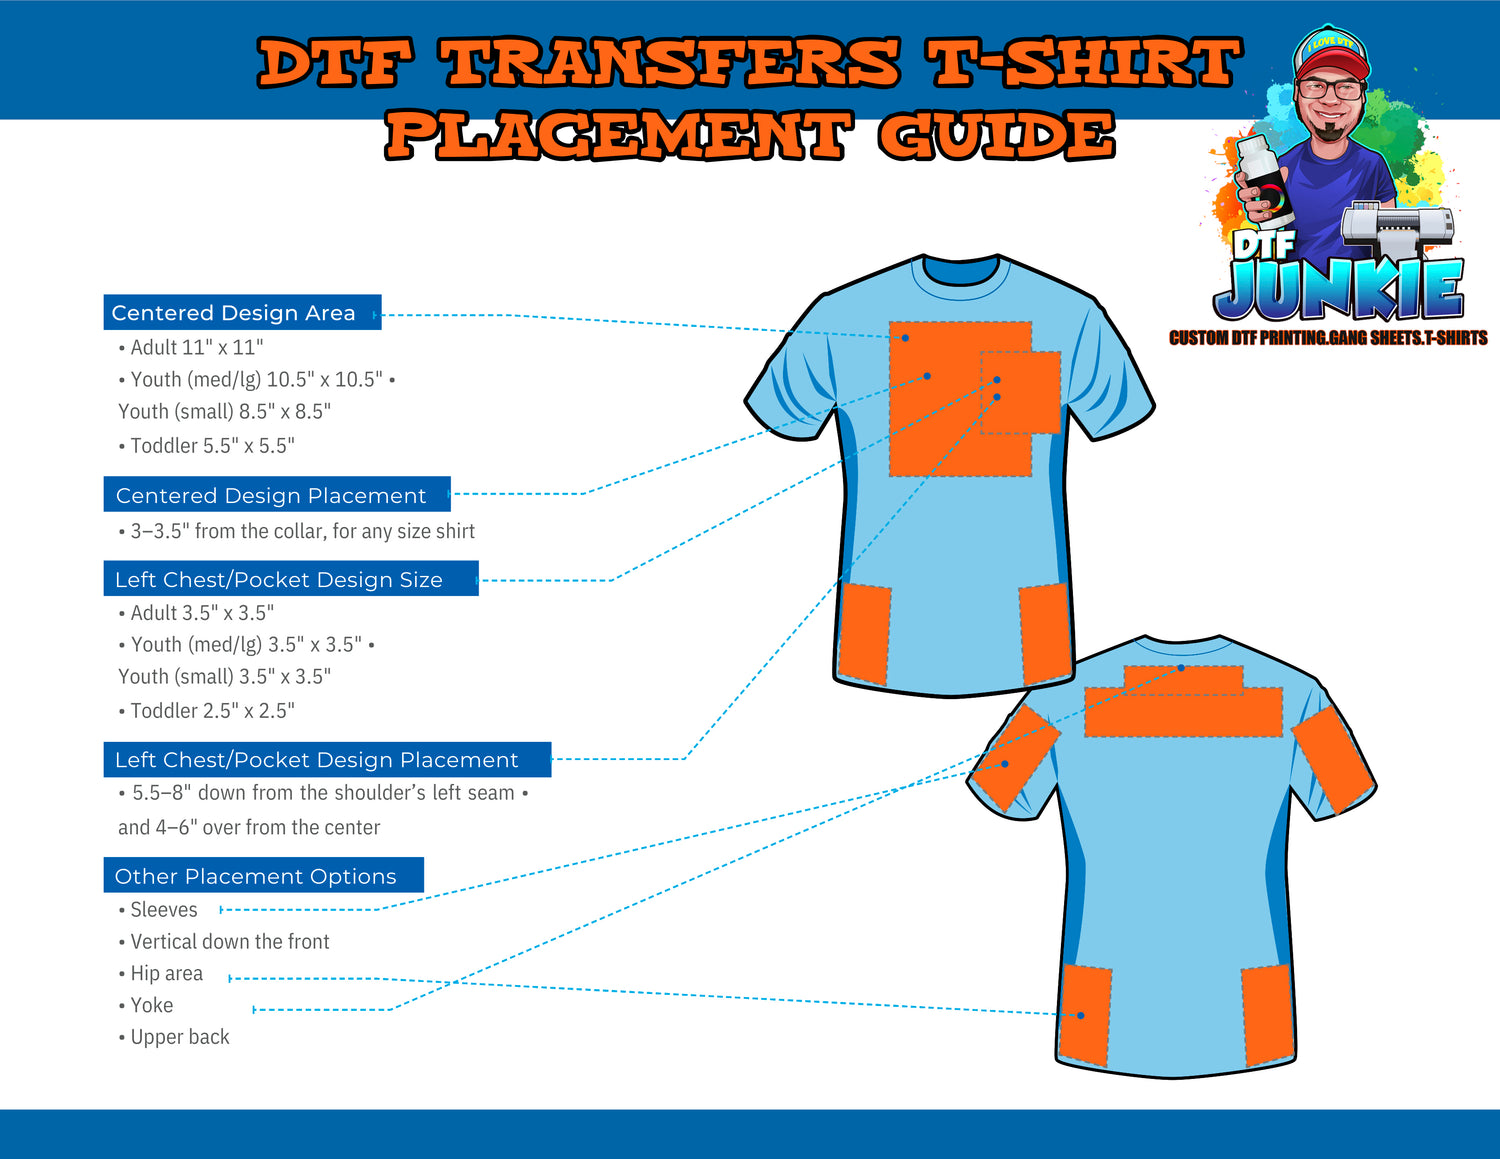 DTF Transfer T-shirt placement guide, Decal placement guide, t-shirt logo placement guide